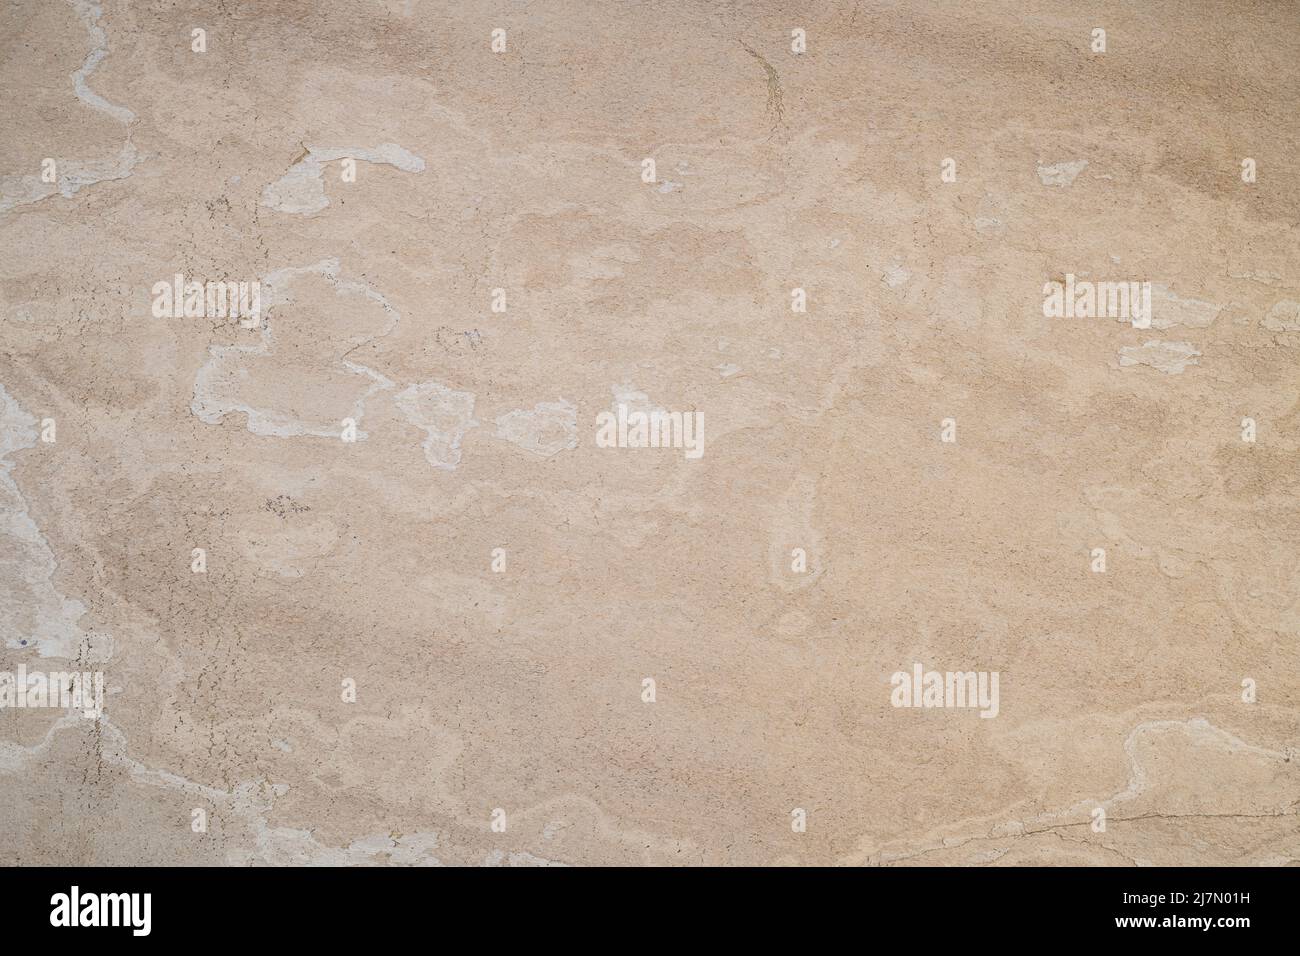 Old concrete wall texture background. Building pattern surface